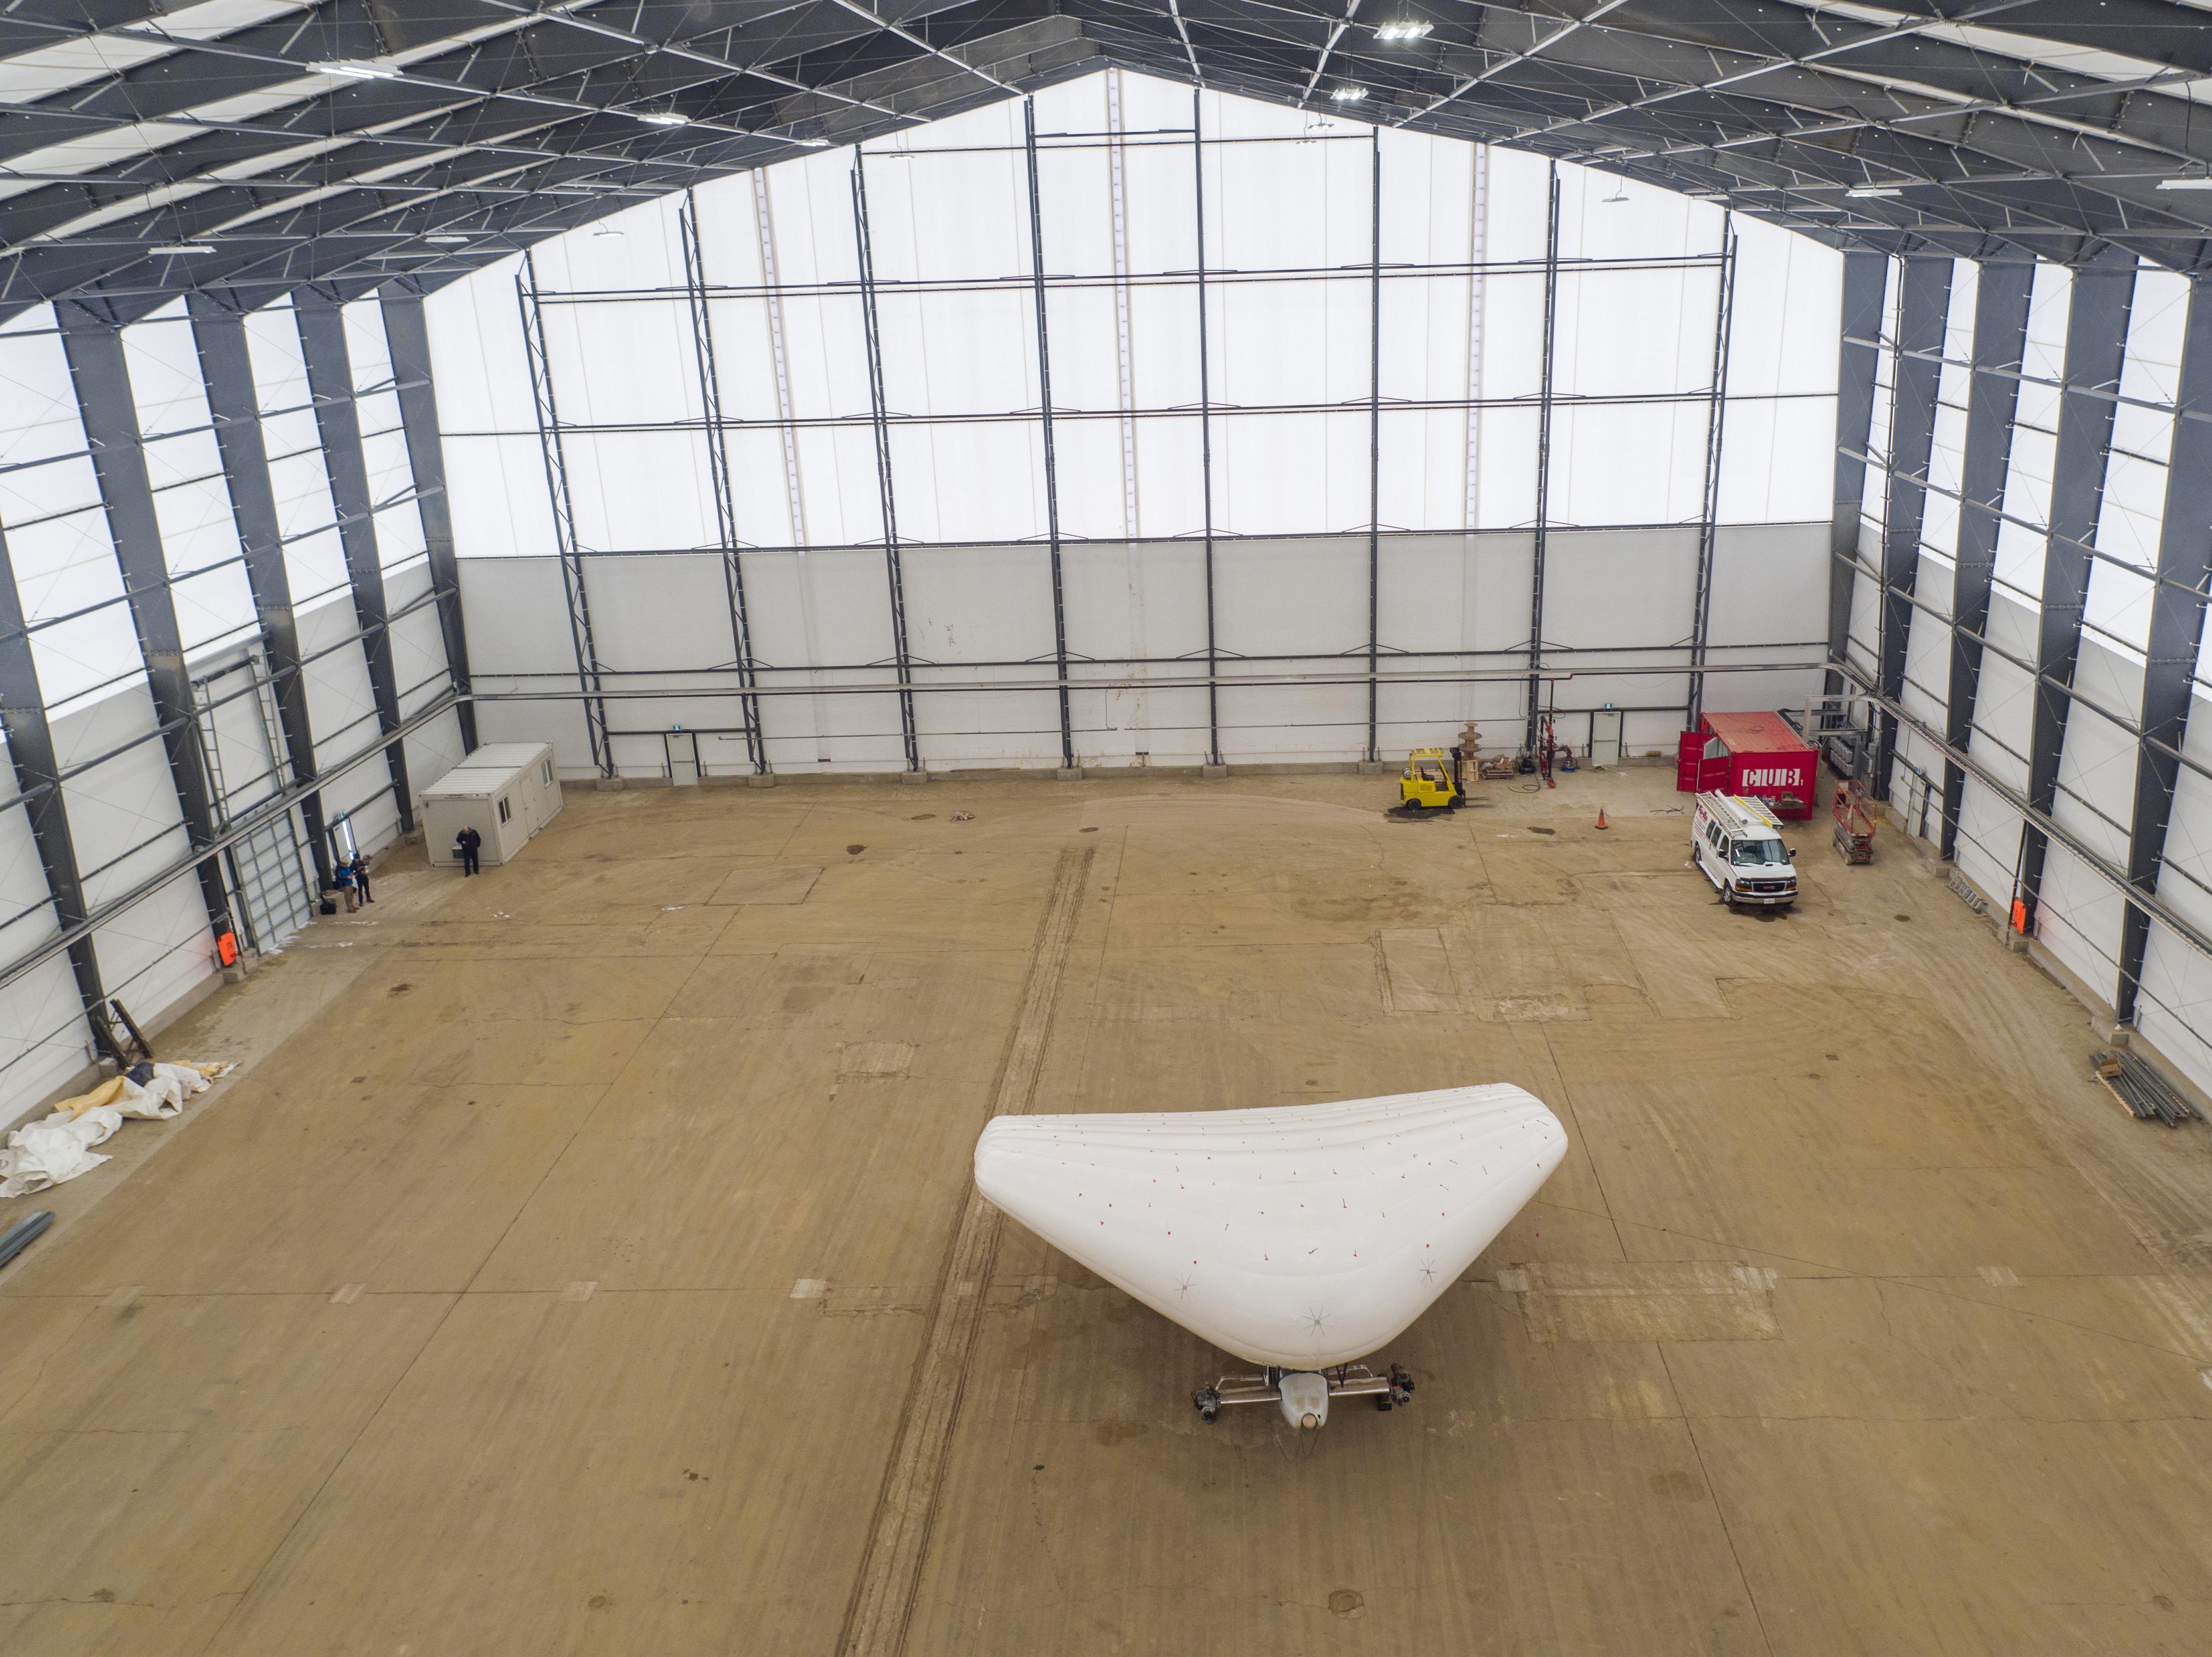 Offgrid construction, aircraft hangar, fabric structure